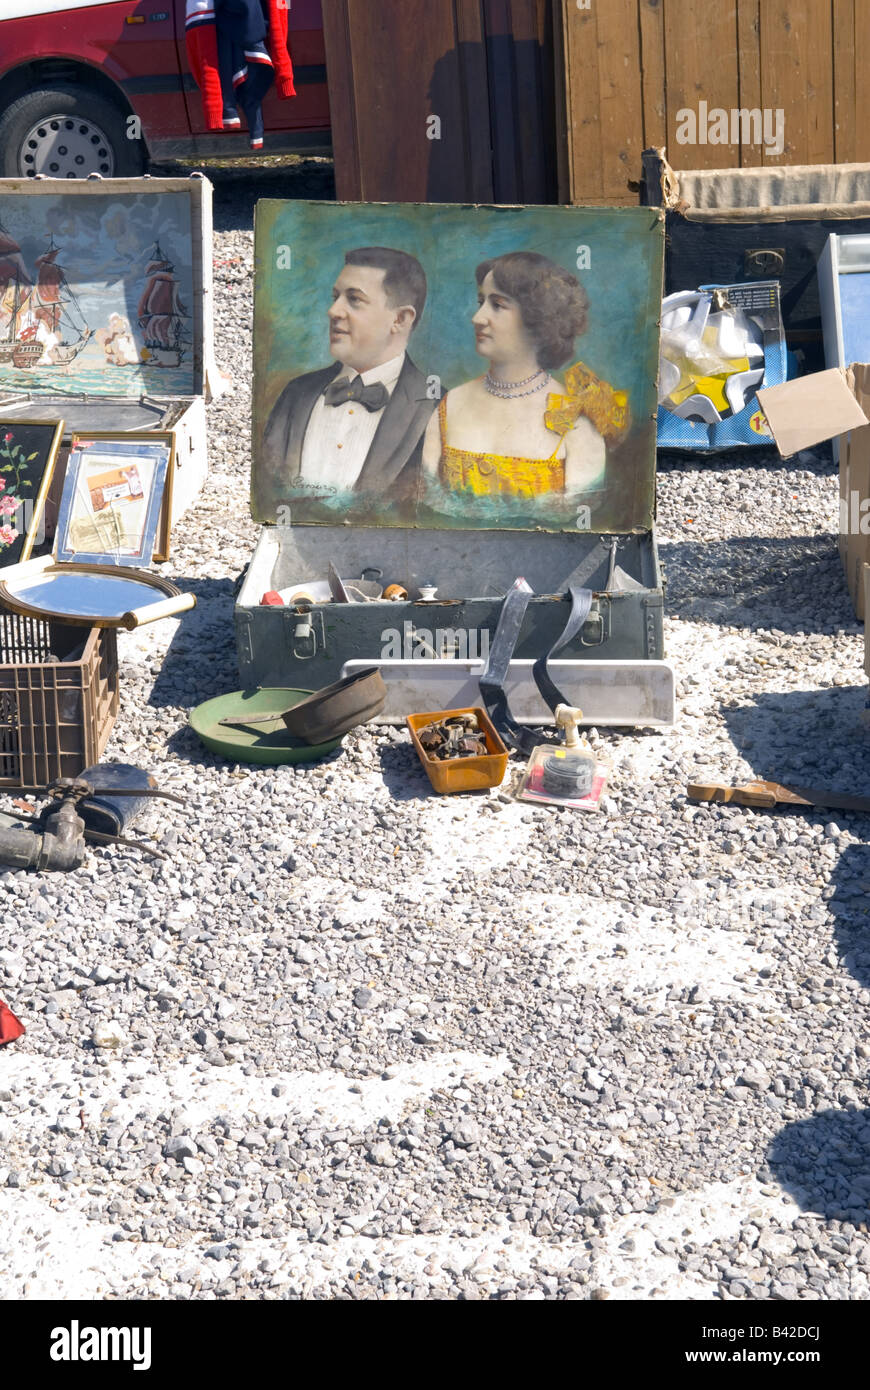 an old portrait painting of couple sits amongst junk at french 'car boot' sale Stock Photo